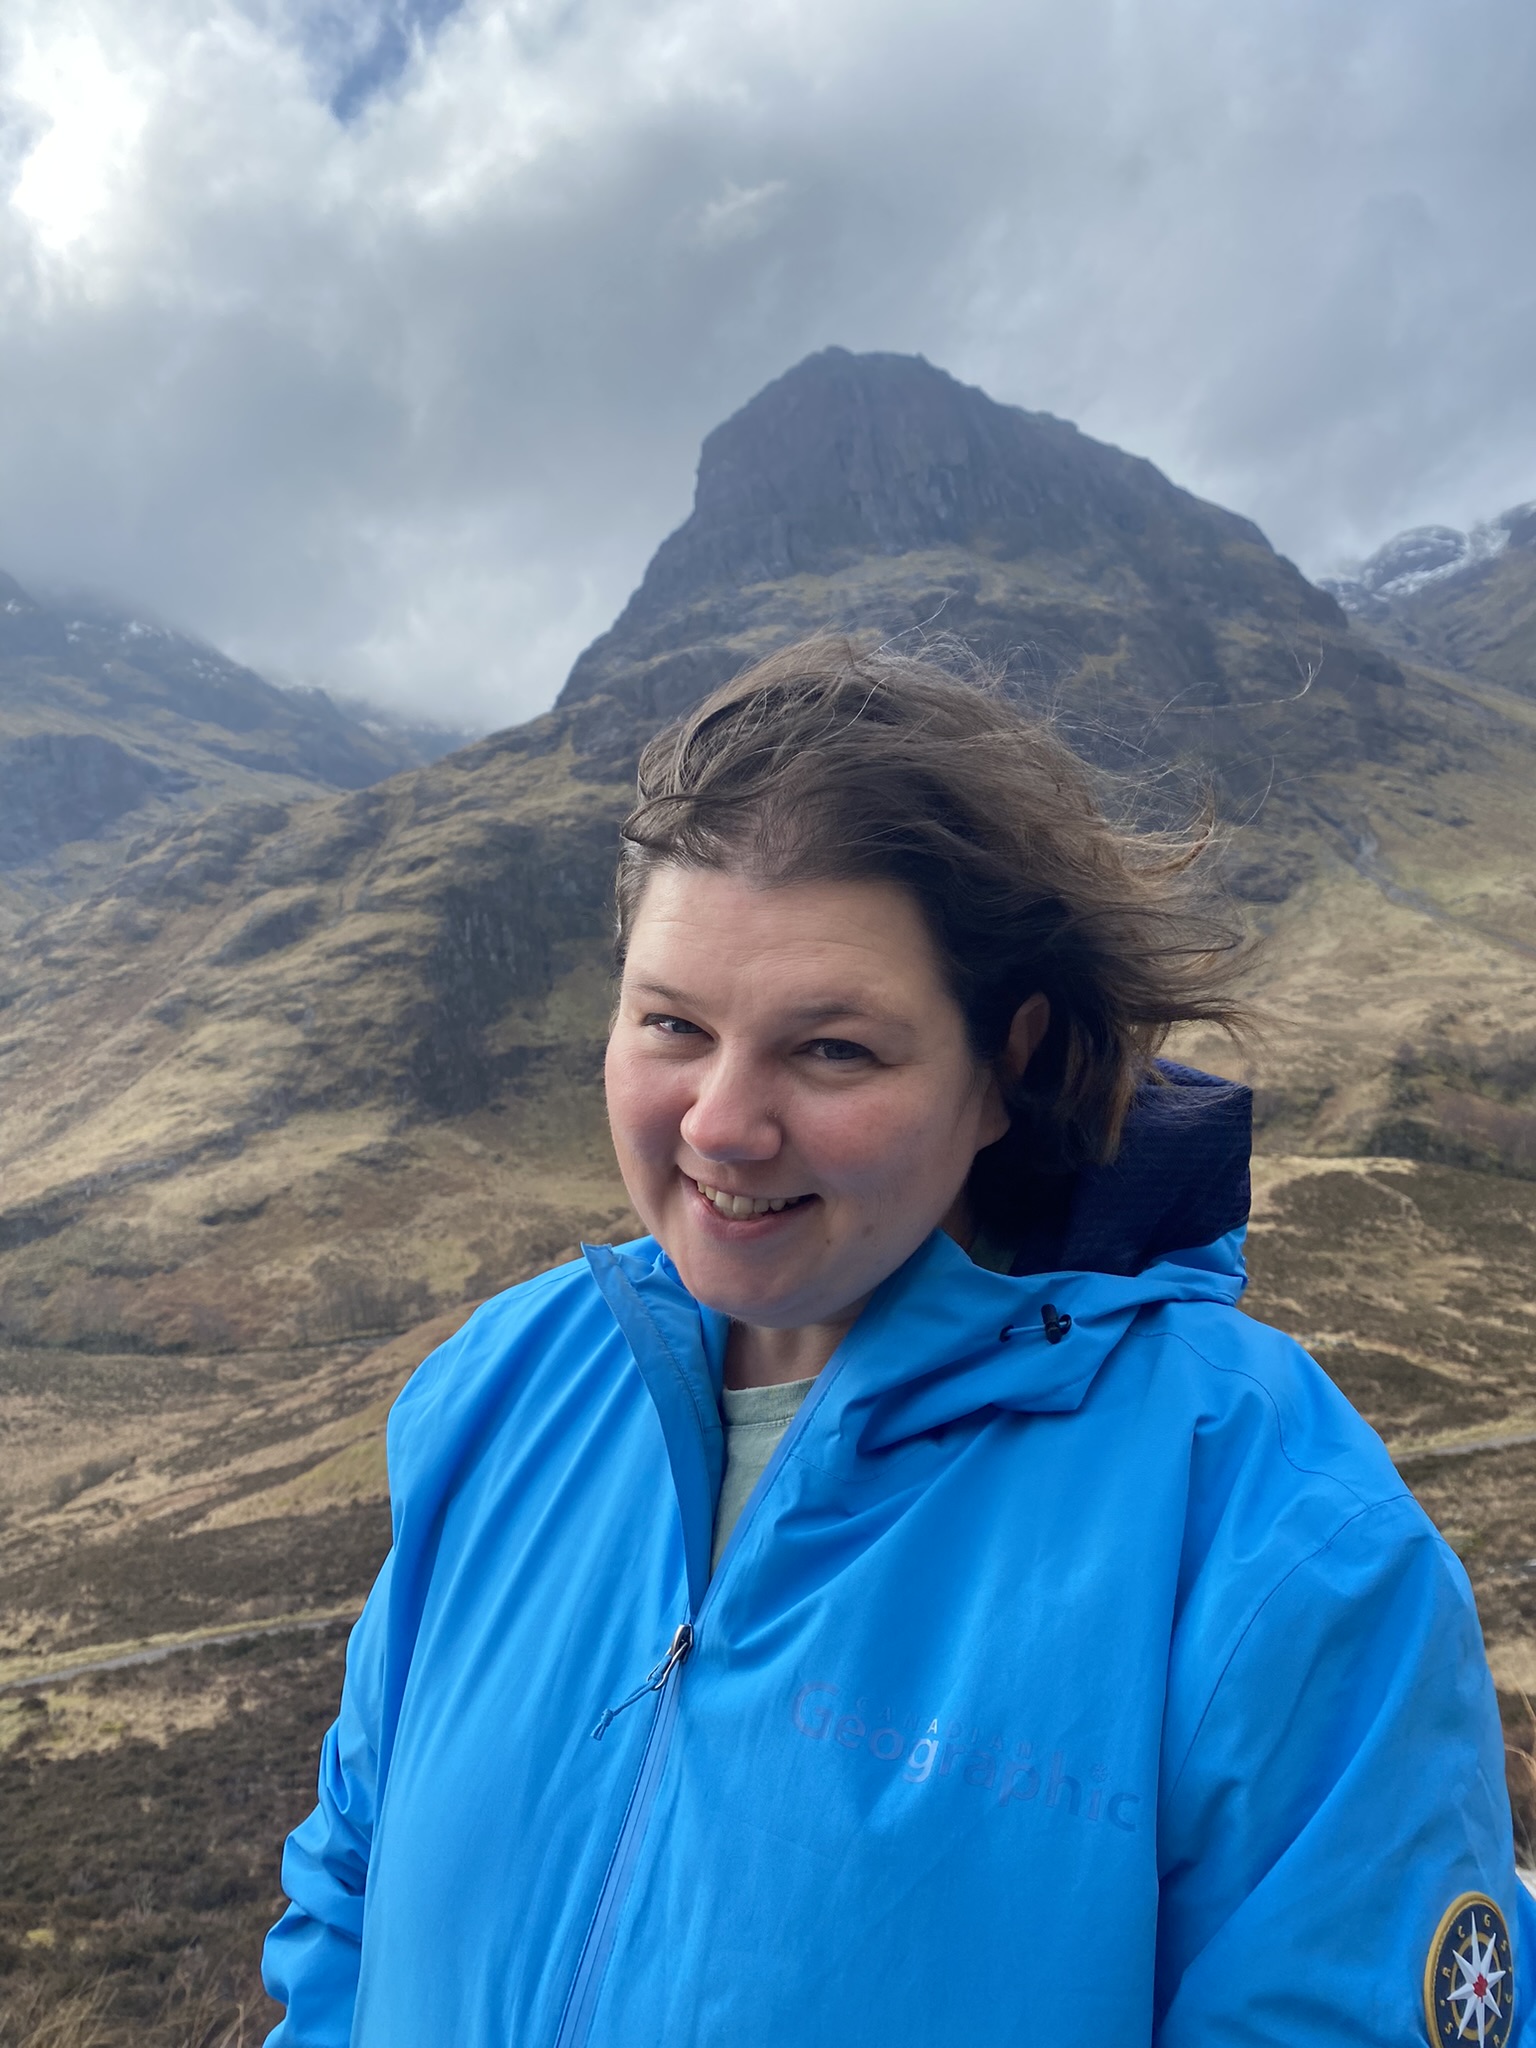 Sam Smadella is smiling standing in front of a mountain range. Sam is wearing a blue wind breaker jacket, and her hair is blowing to the side from the wind.